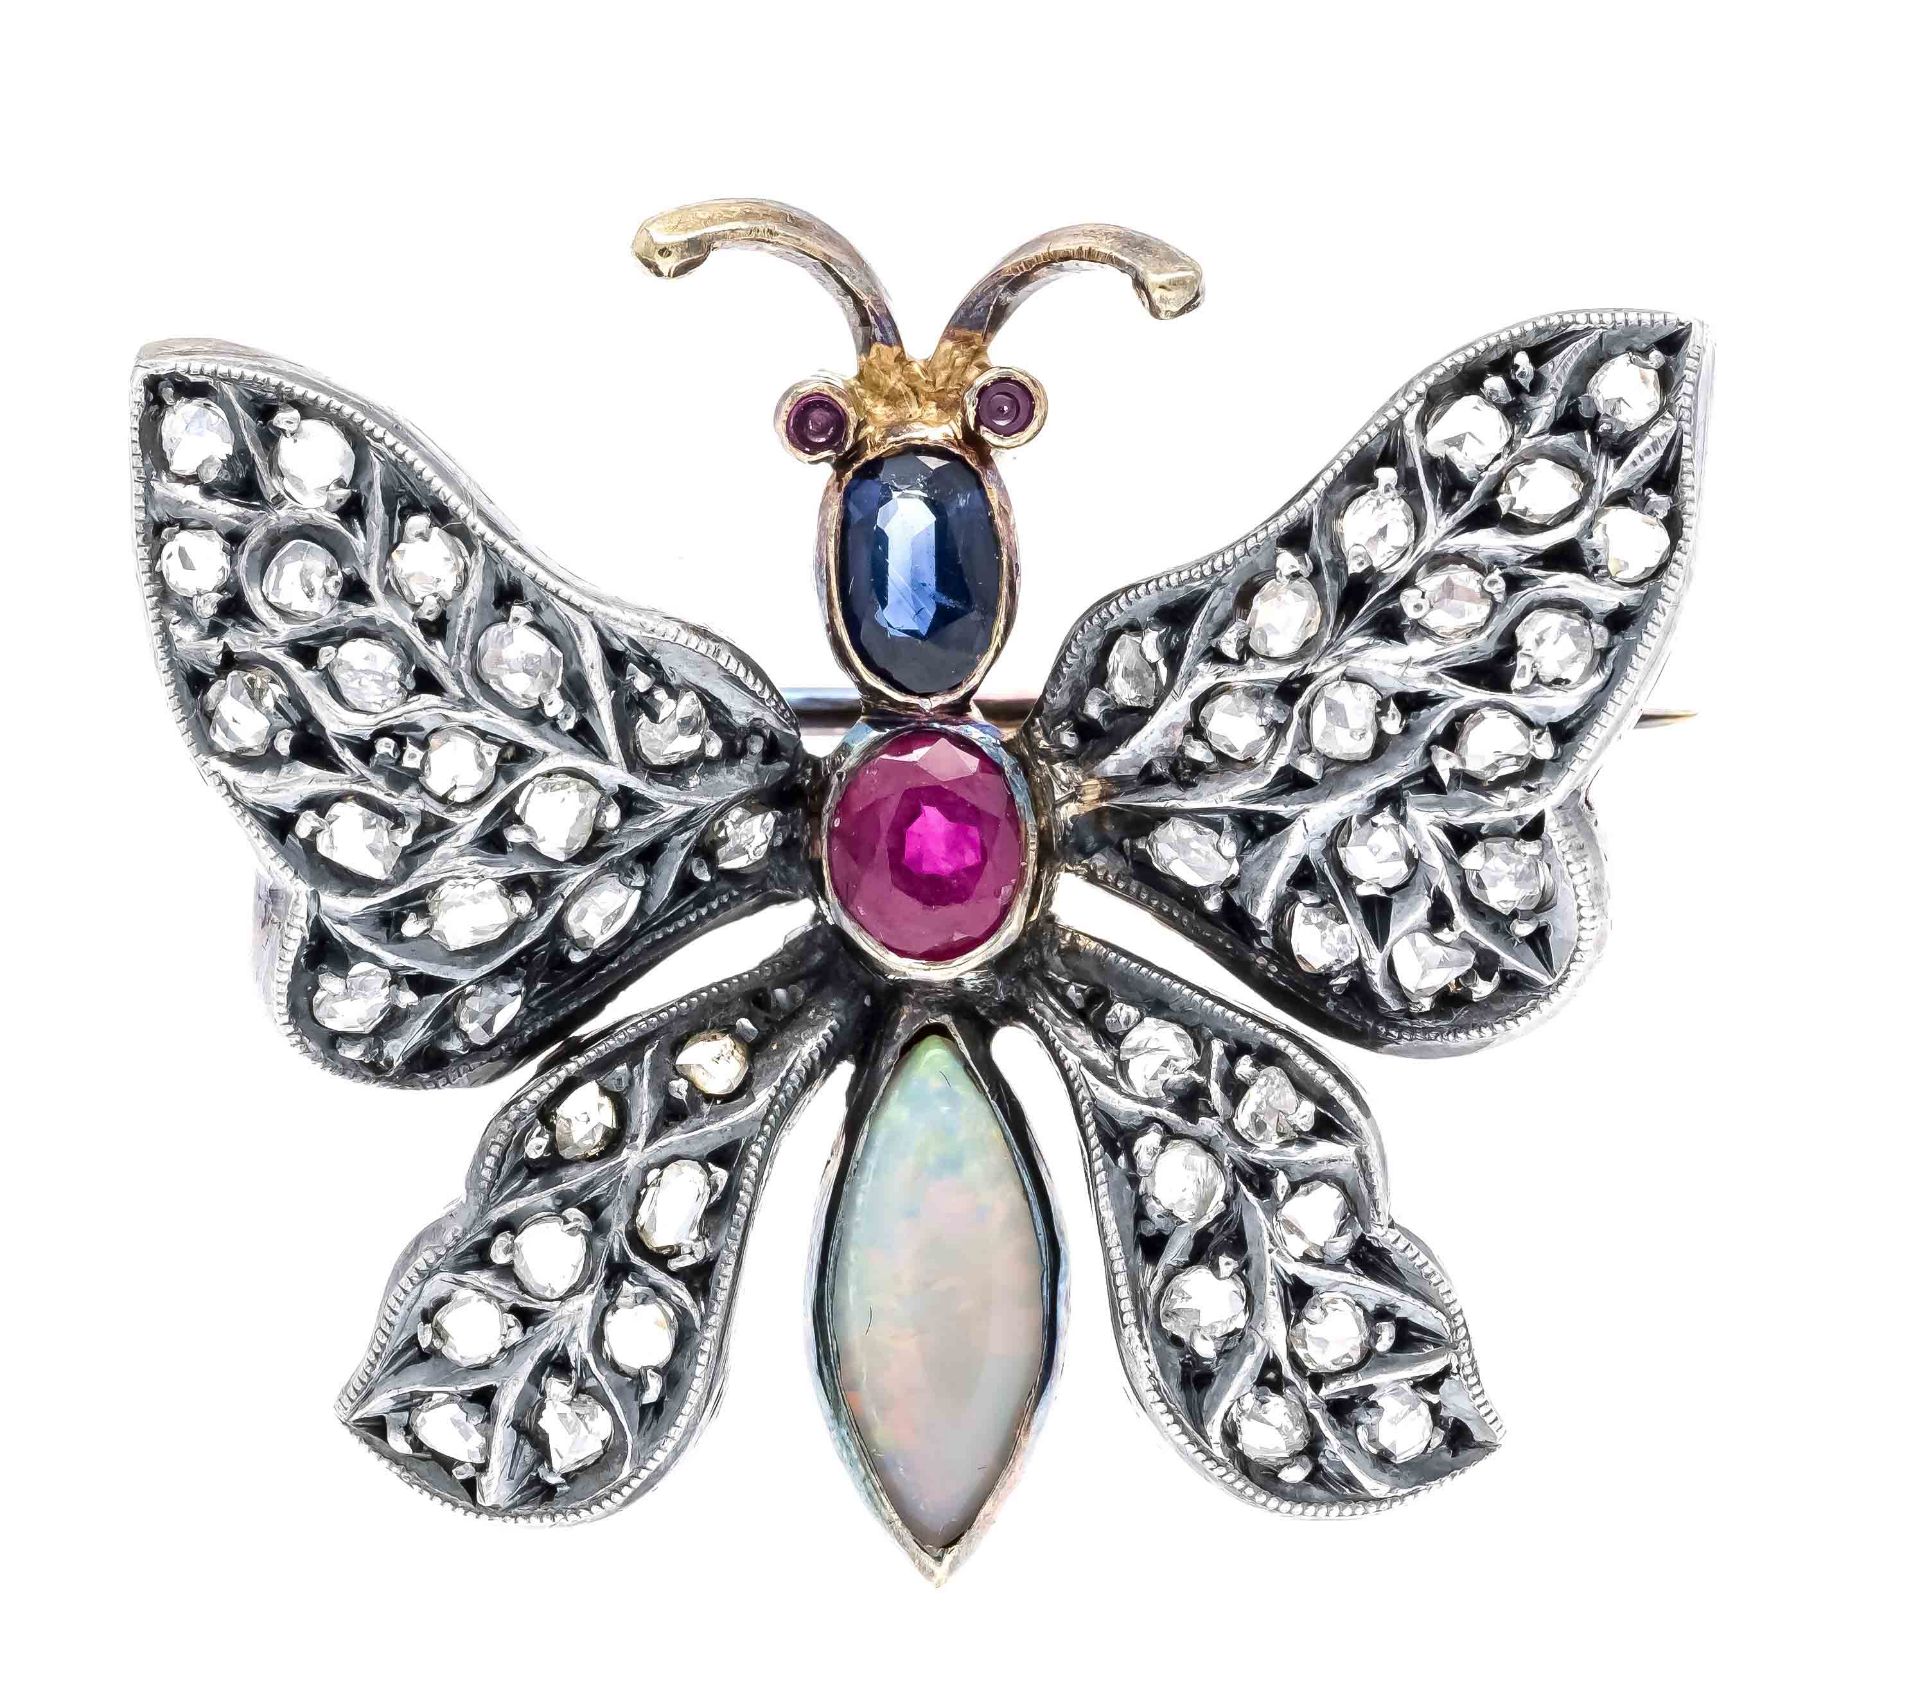 Butterfly brooch, silver 925/000 and GG 800/000, unmarked, tested, with a milky opal cabochon 10 mm,